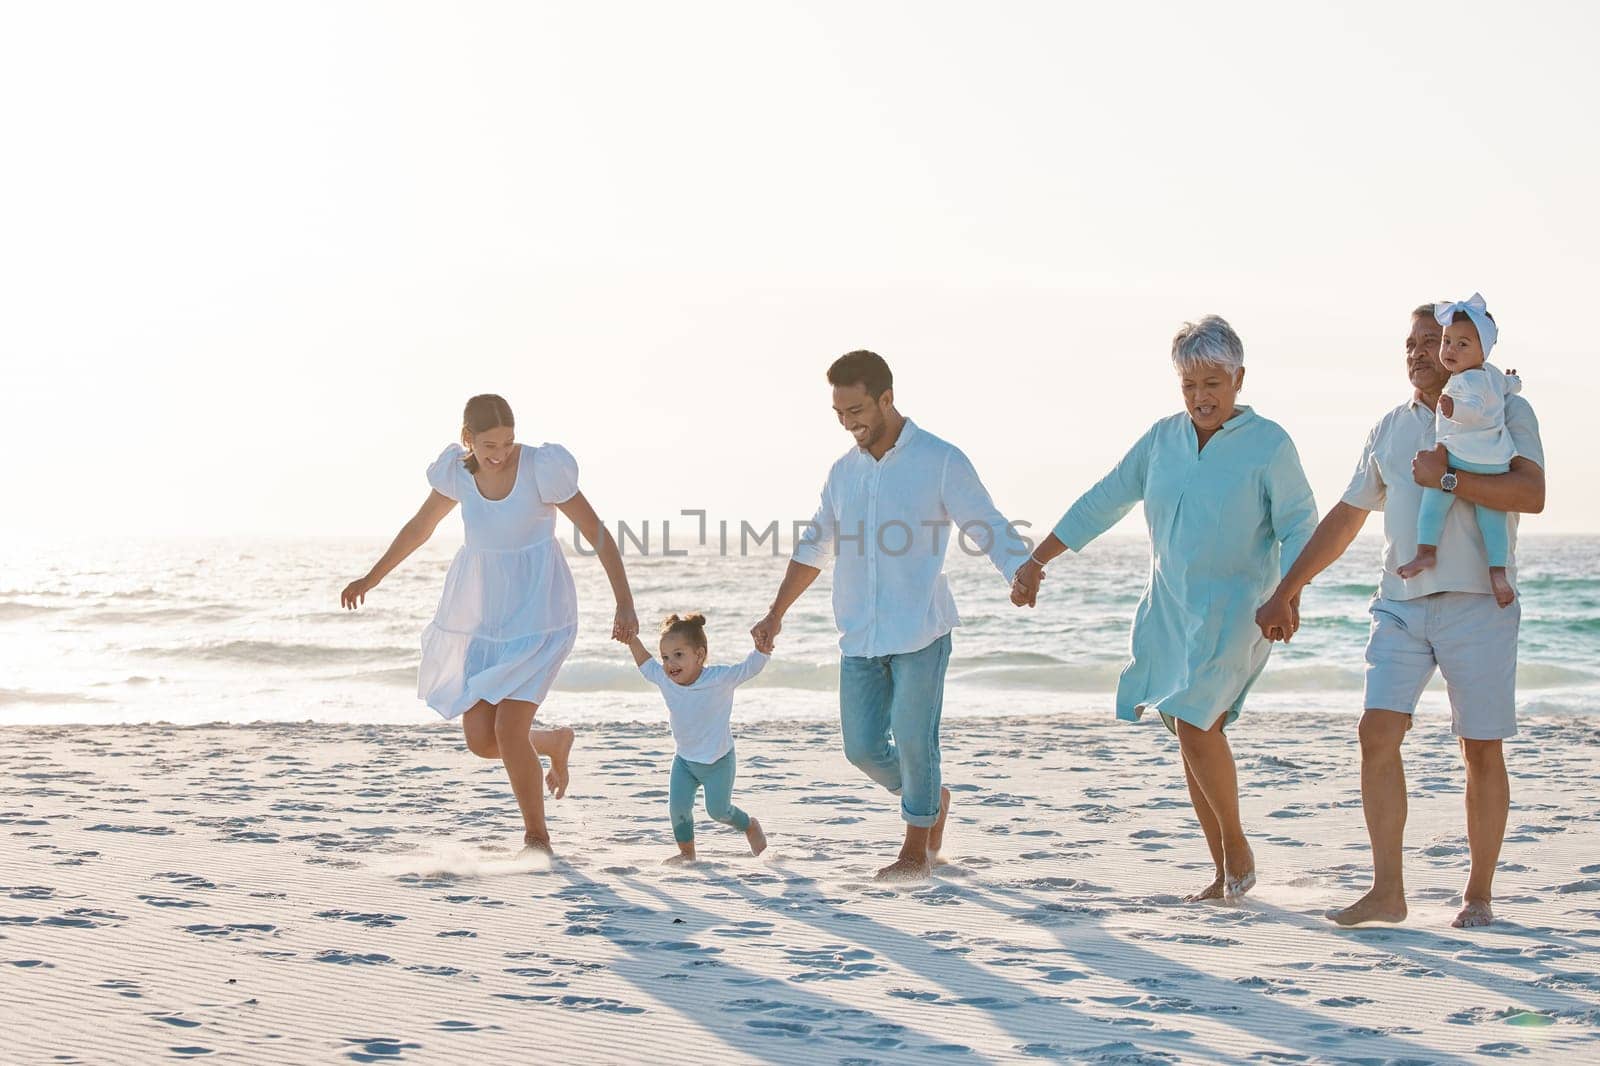 Big family, holding hands and walking on beach for holiday weekend or vacation with mockup space. Grandparents, parents and kids on a ocean walk together for fun bonding or quality time in nature.